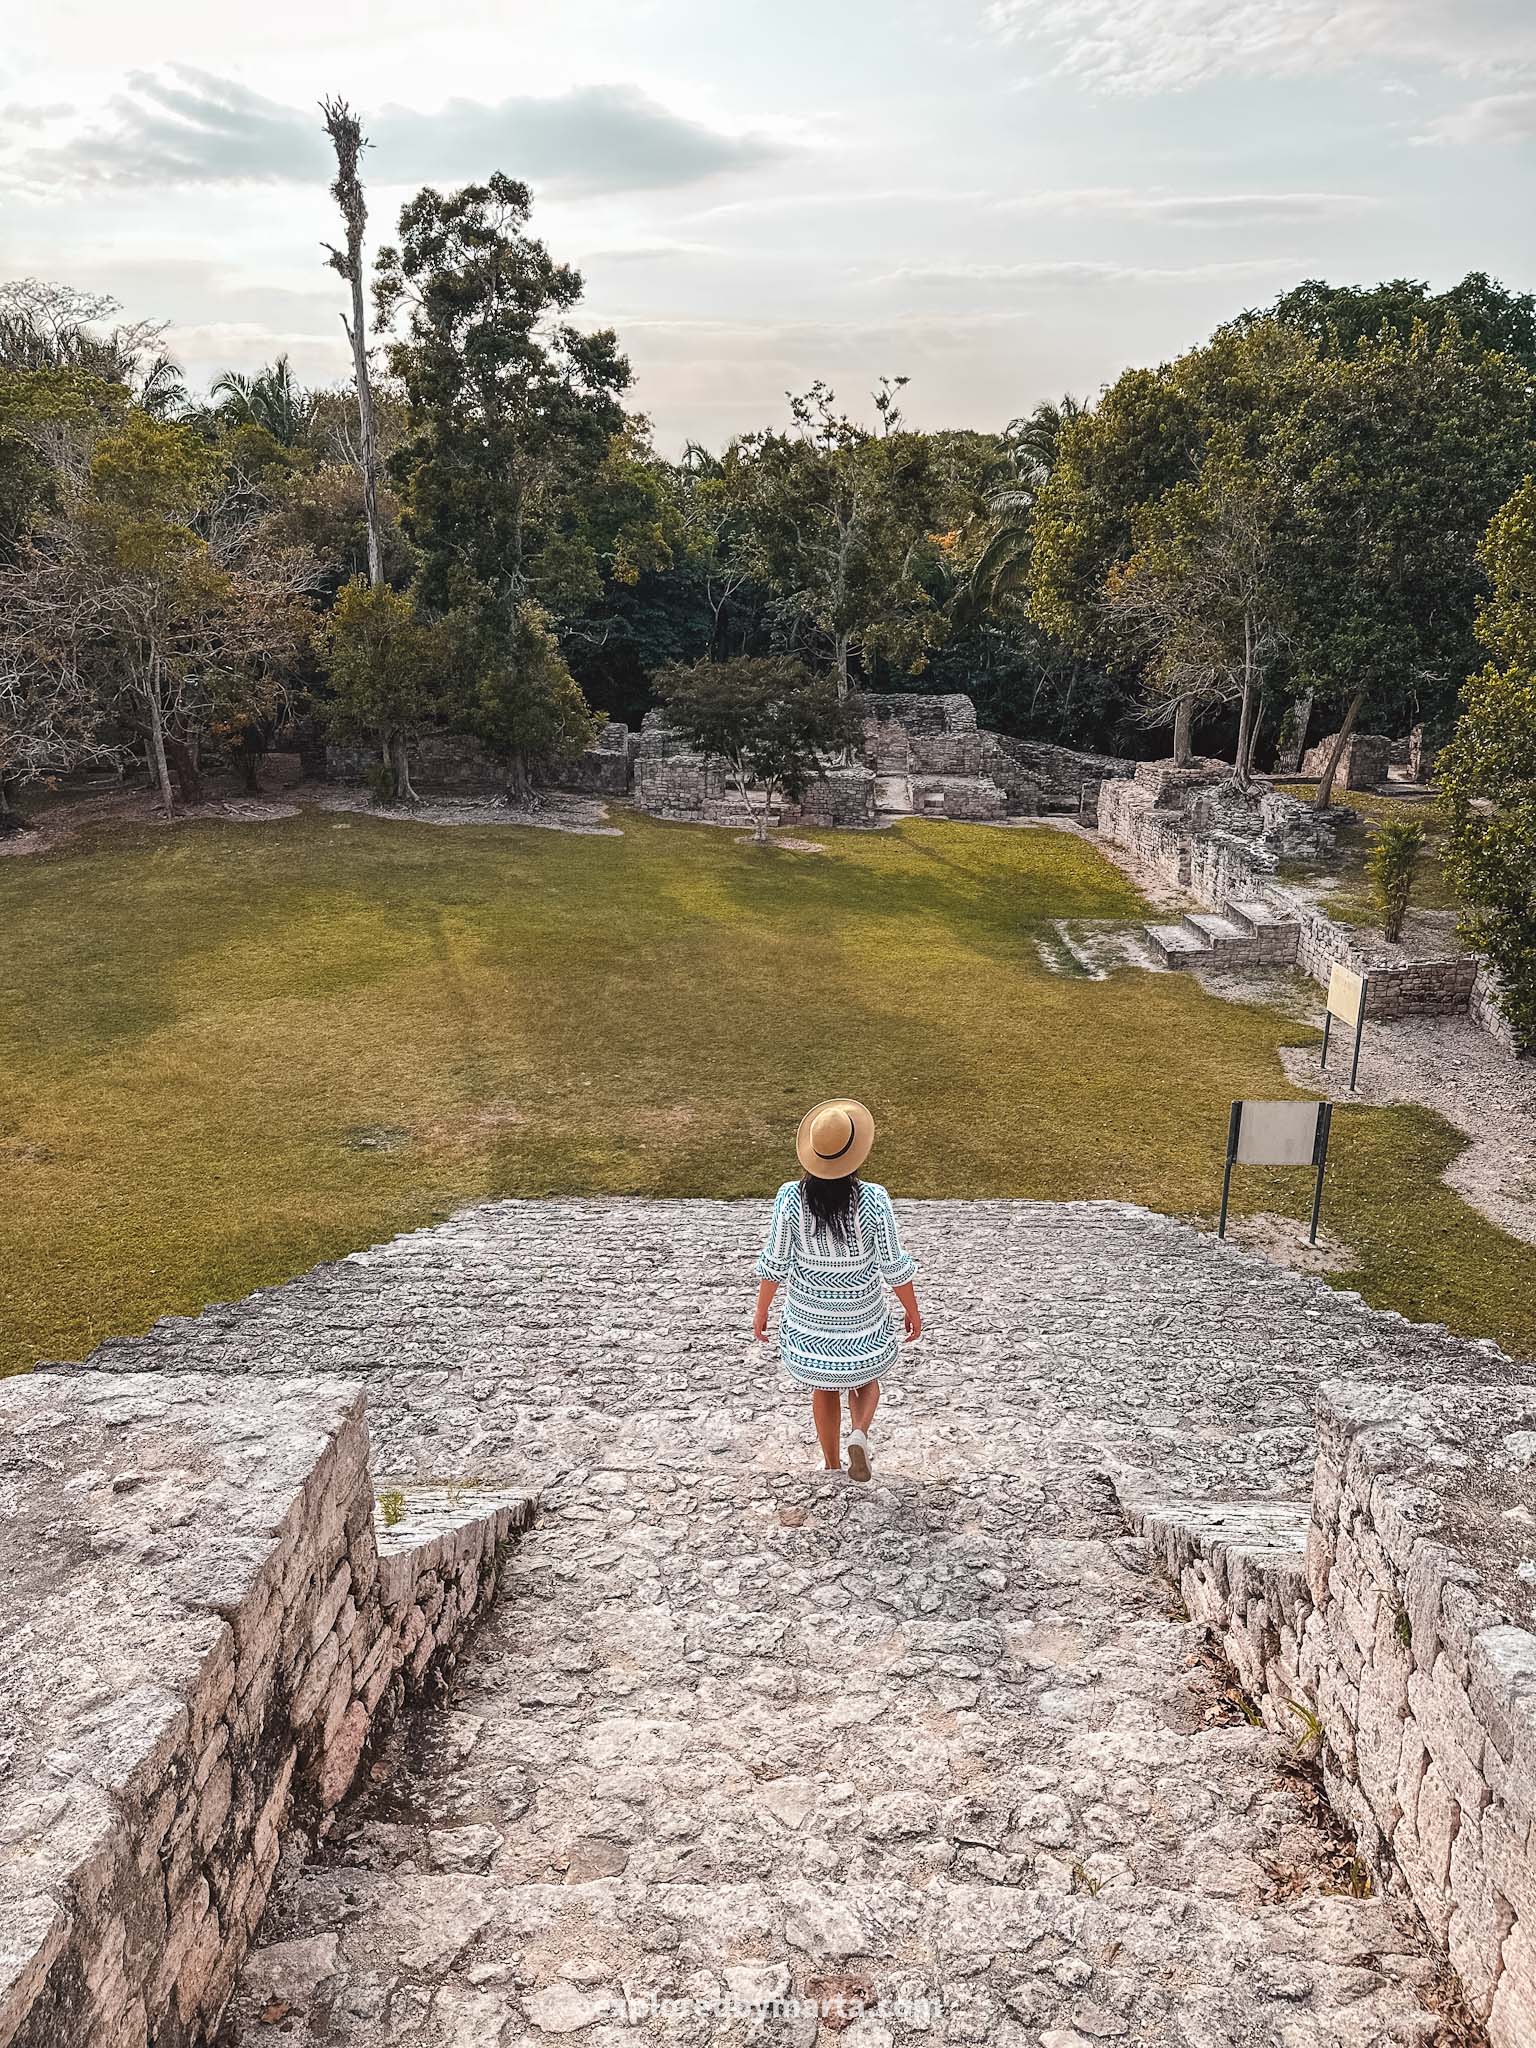 Kohunlich Archaeological Zone in Mexico